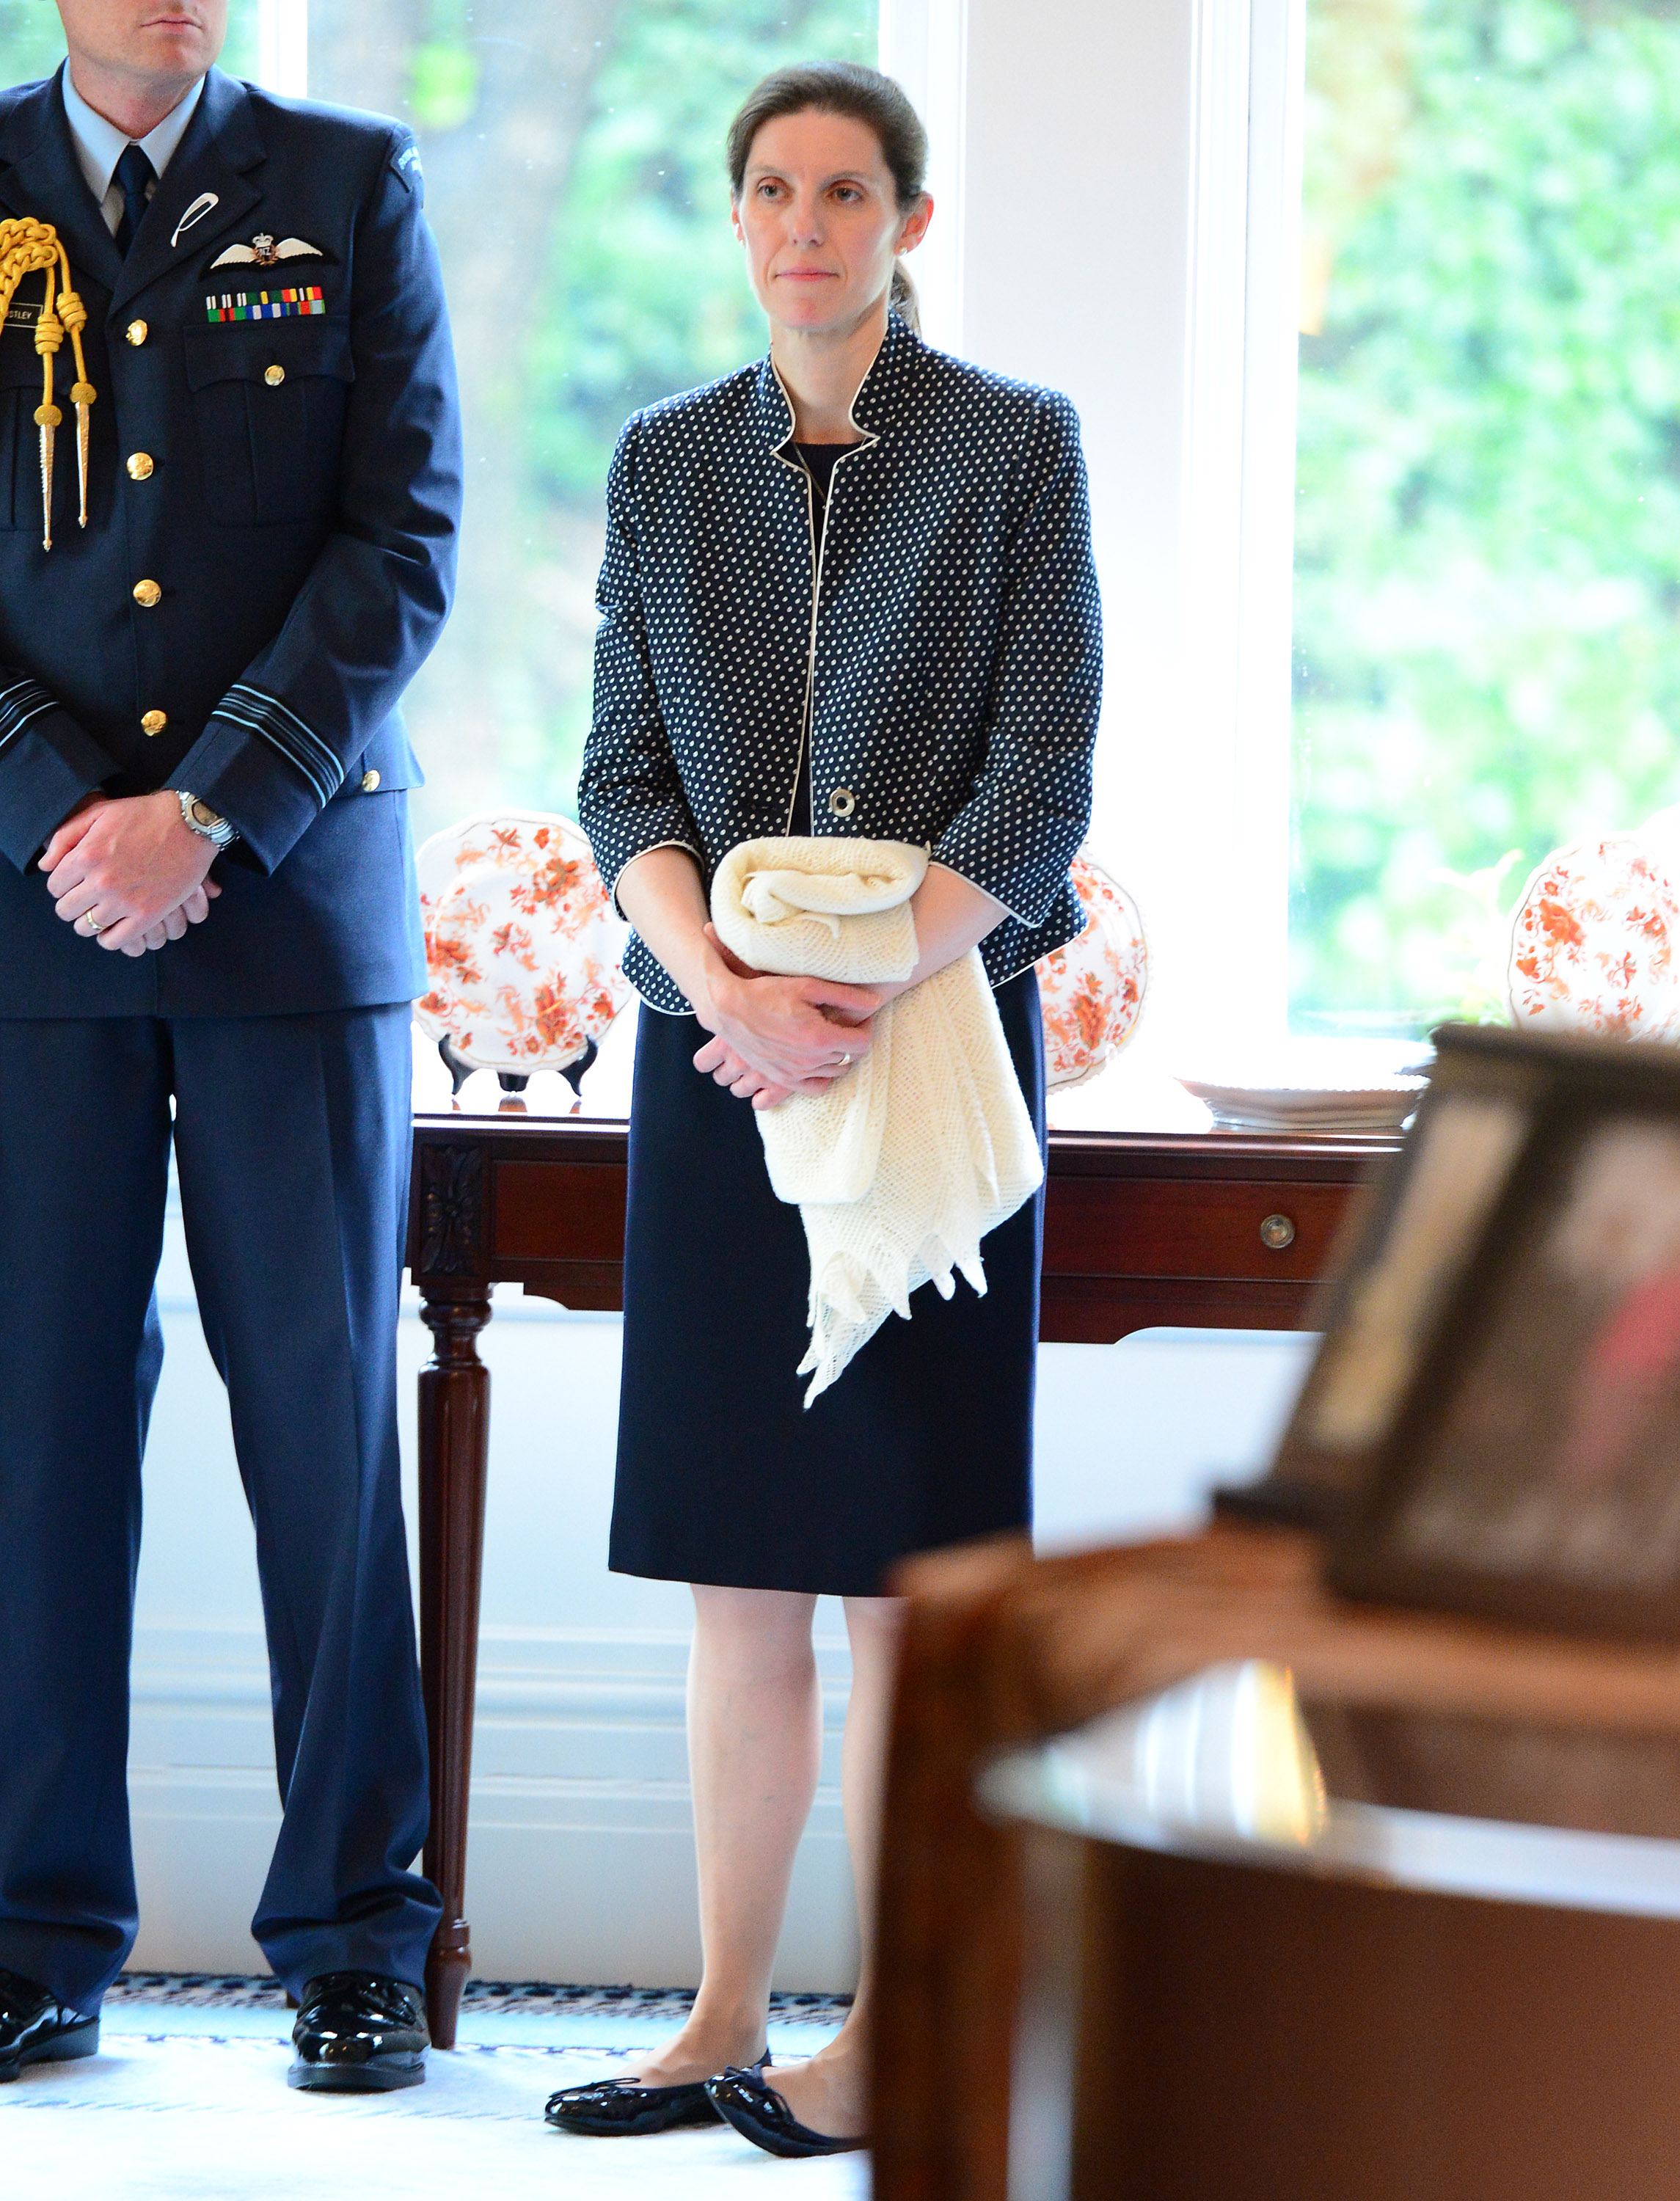 Maria Borrallo at the Plunkett's Parent's Group at Government House on April 9, 2014 in Wellington, New Zealand | Source: Getty Images